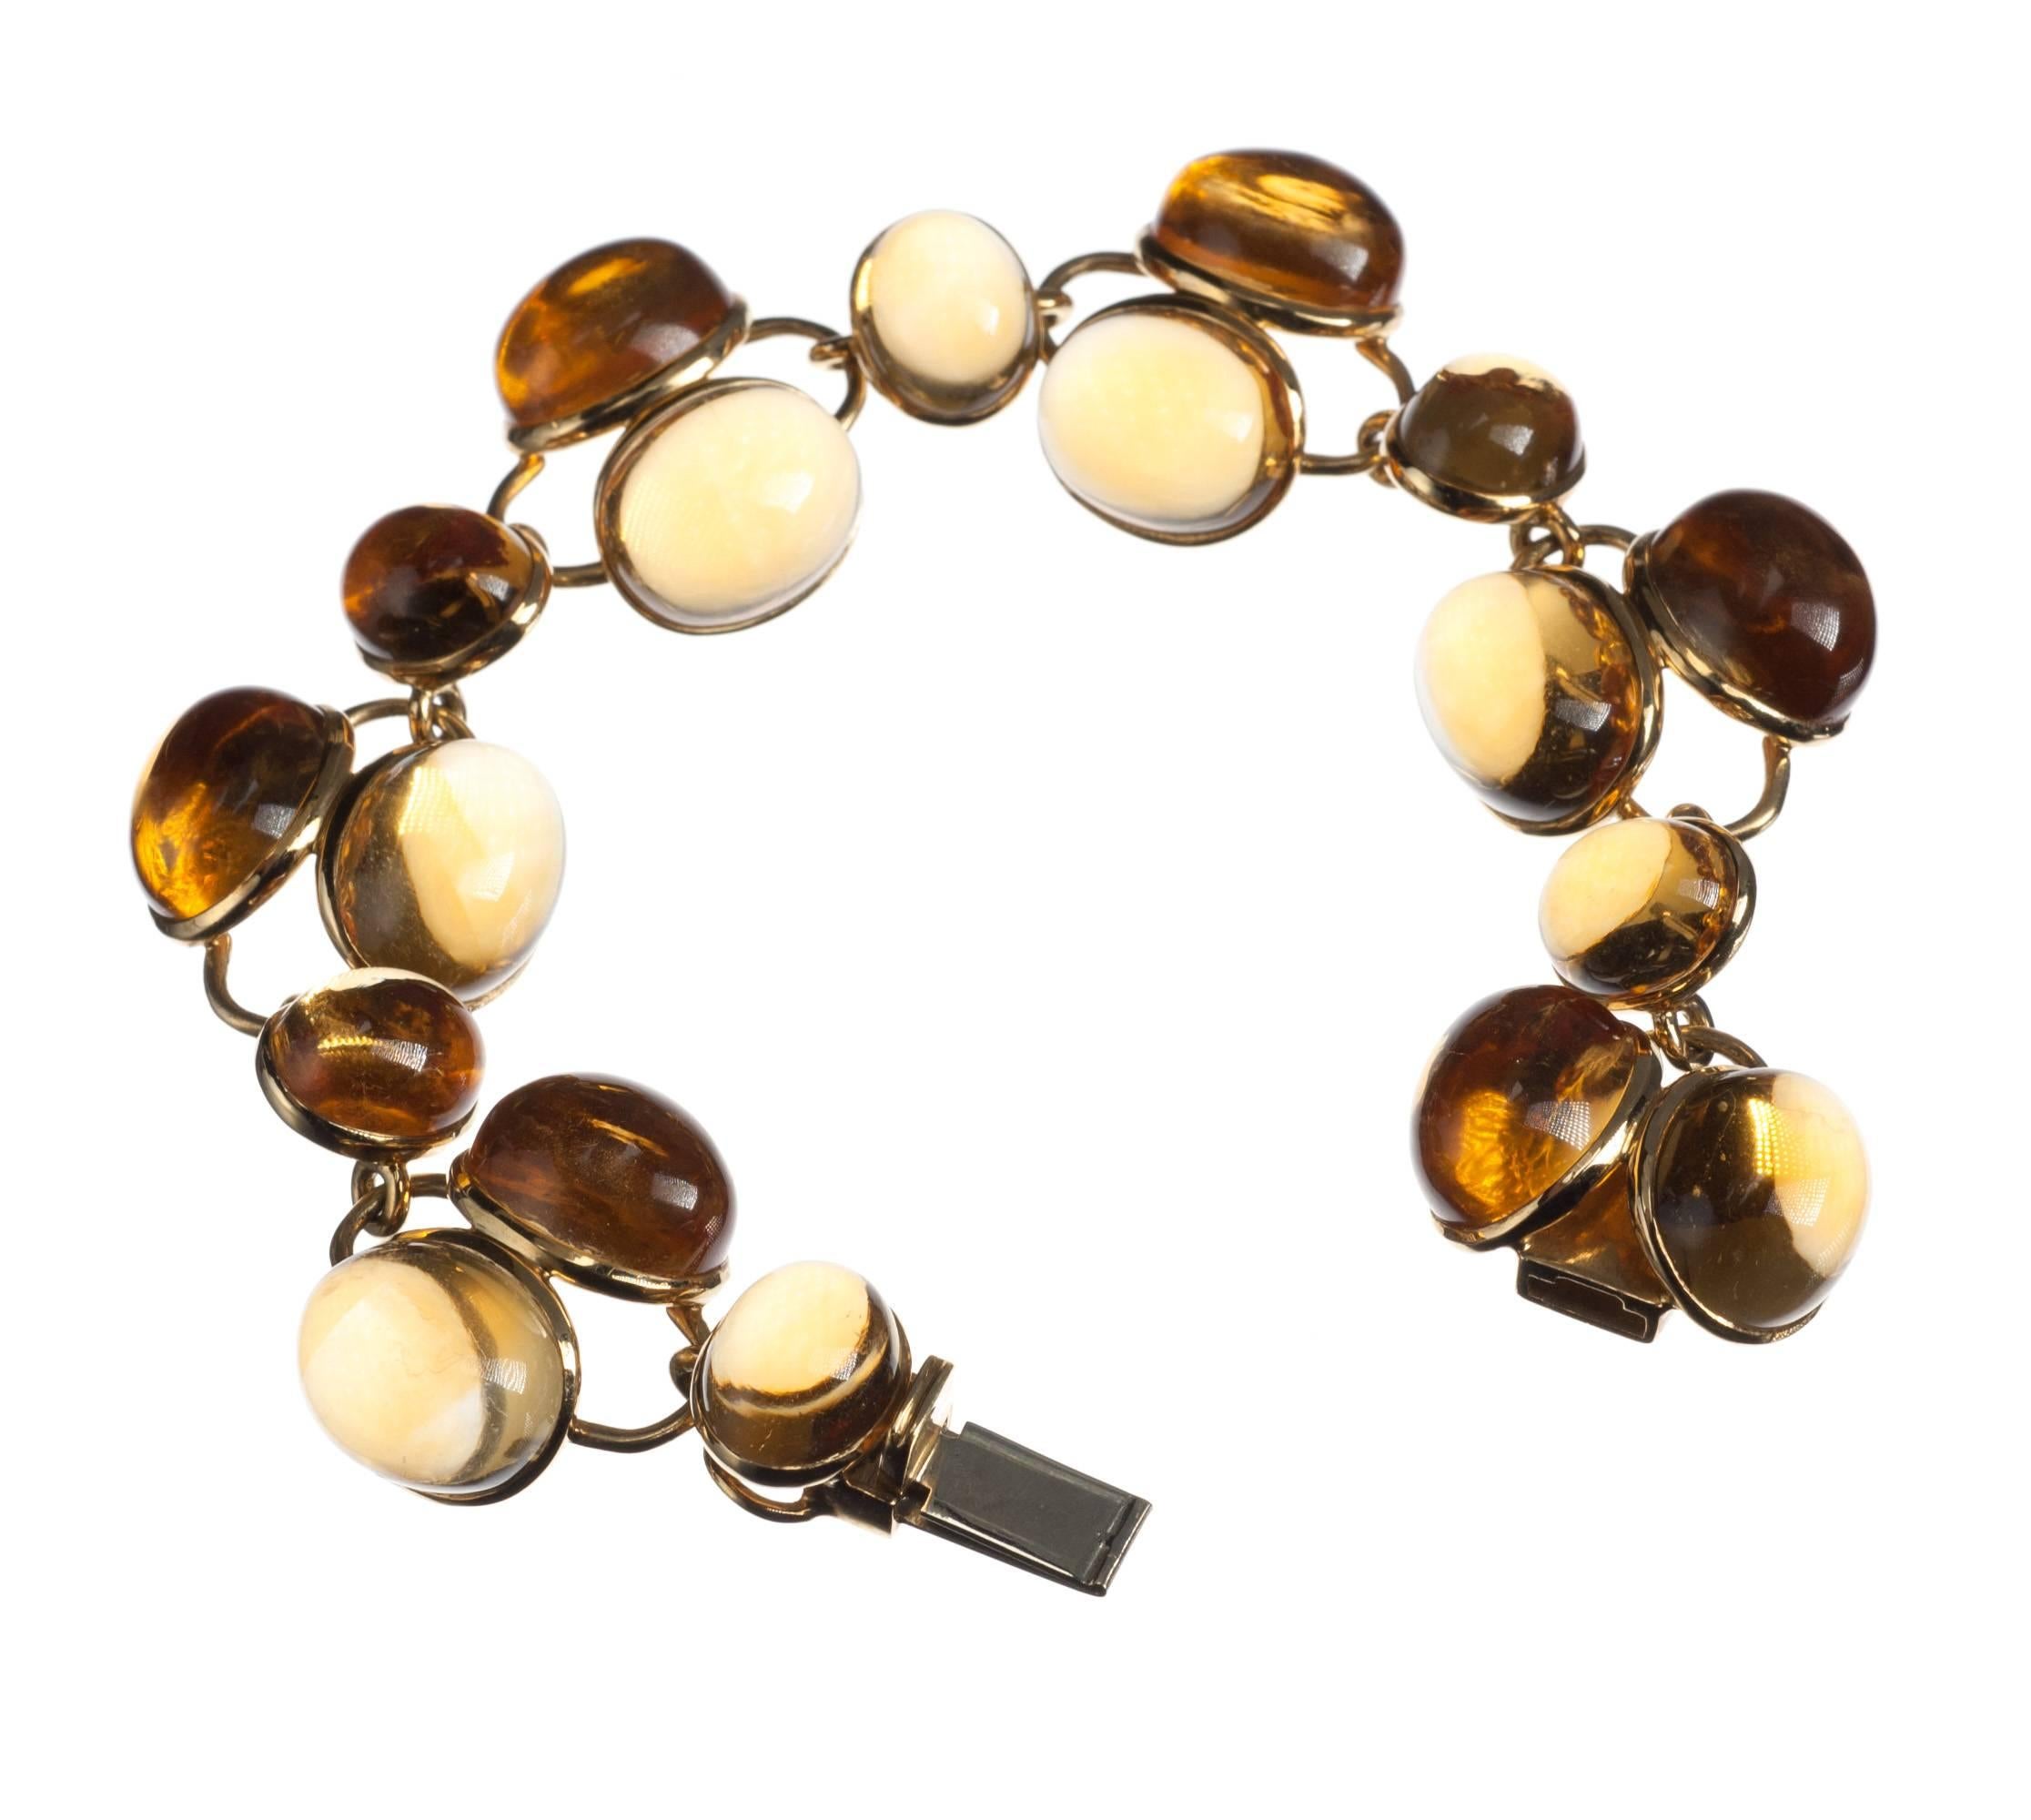 A stunning balance of form and color, this citrine bracelet features 18 oval cabochon citrines, six measuring at 8x12mm and 12 measuring at 10x12mm, bezel-set in a minimalist 18-karat yellow gold framework that complements the curves of the